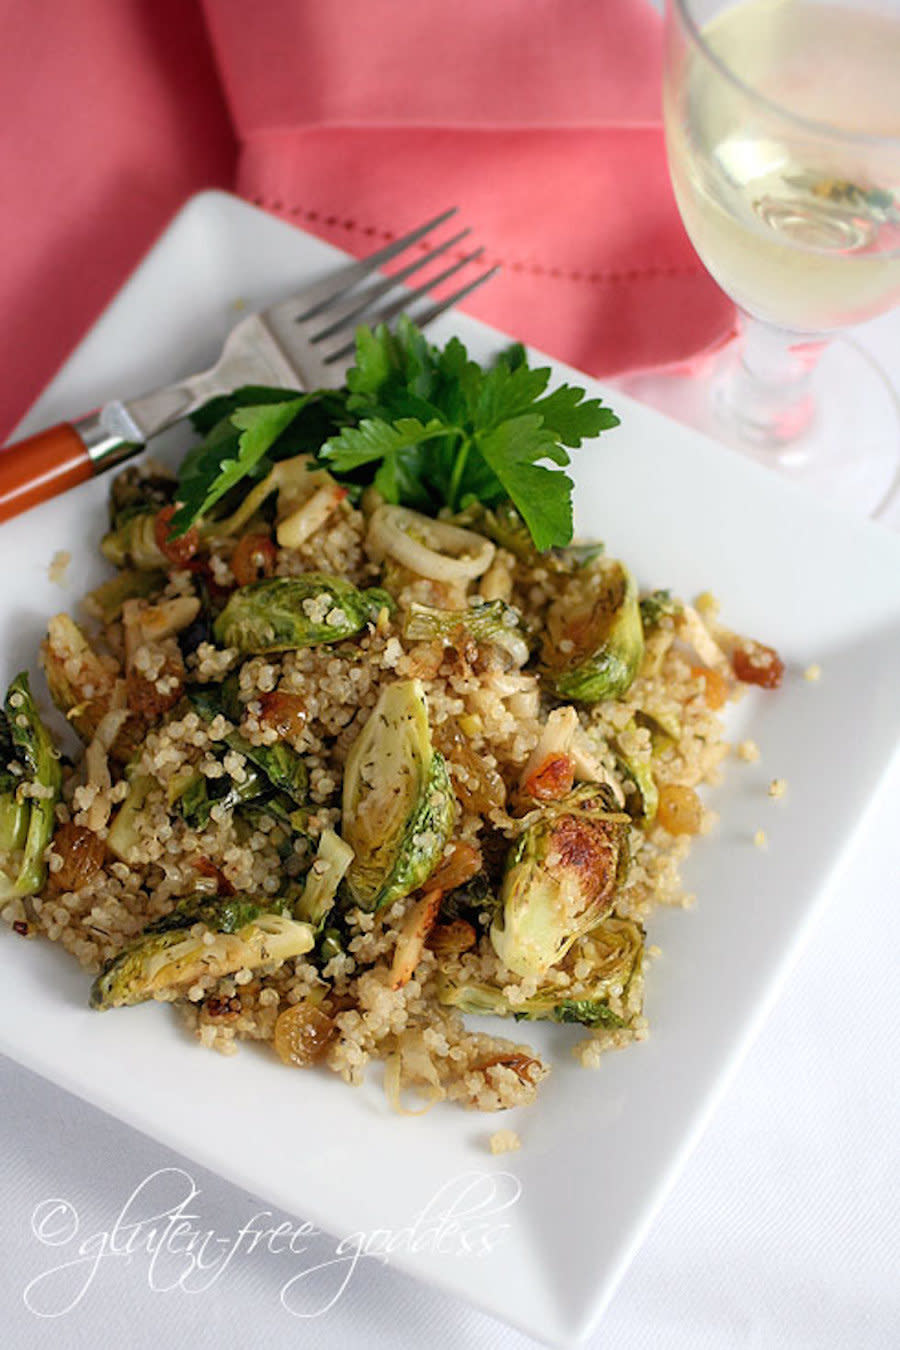 <strong>Get the <a href="http://glutenfreegoddess.blogspot.com/2011/04/quinoa-with-roasted-brussels-sprouts.html" target="_blank">Quinoa With Roasted Brussels Sprouts, Leeks & Slivered Almonds recipe</a> by Gluten-Free Goddess</strong>